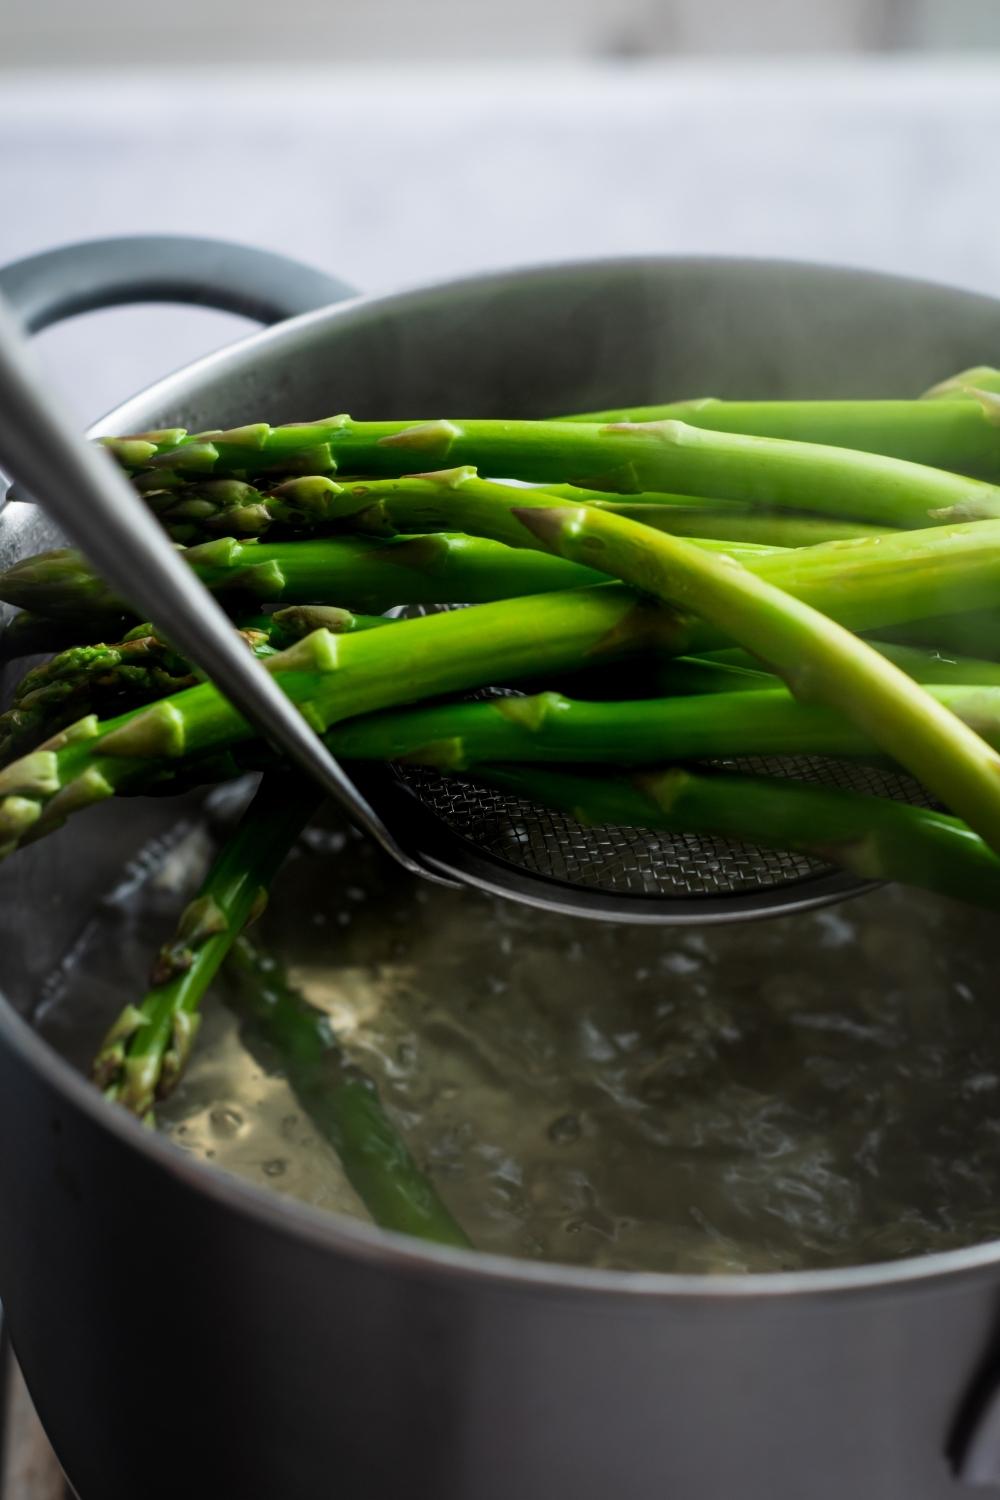 A deep pot with boiling water and a slottes spoon dishing out the bright green cooked asparagus.